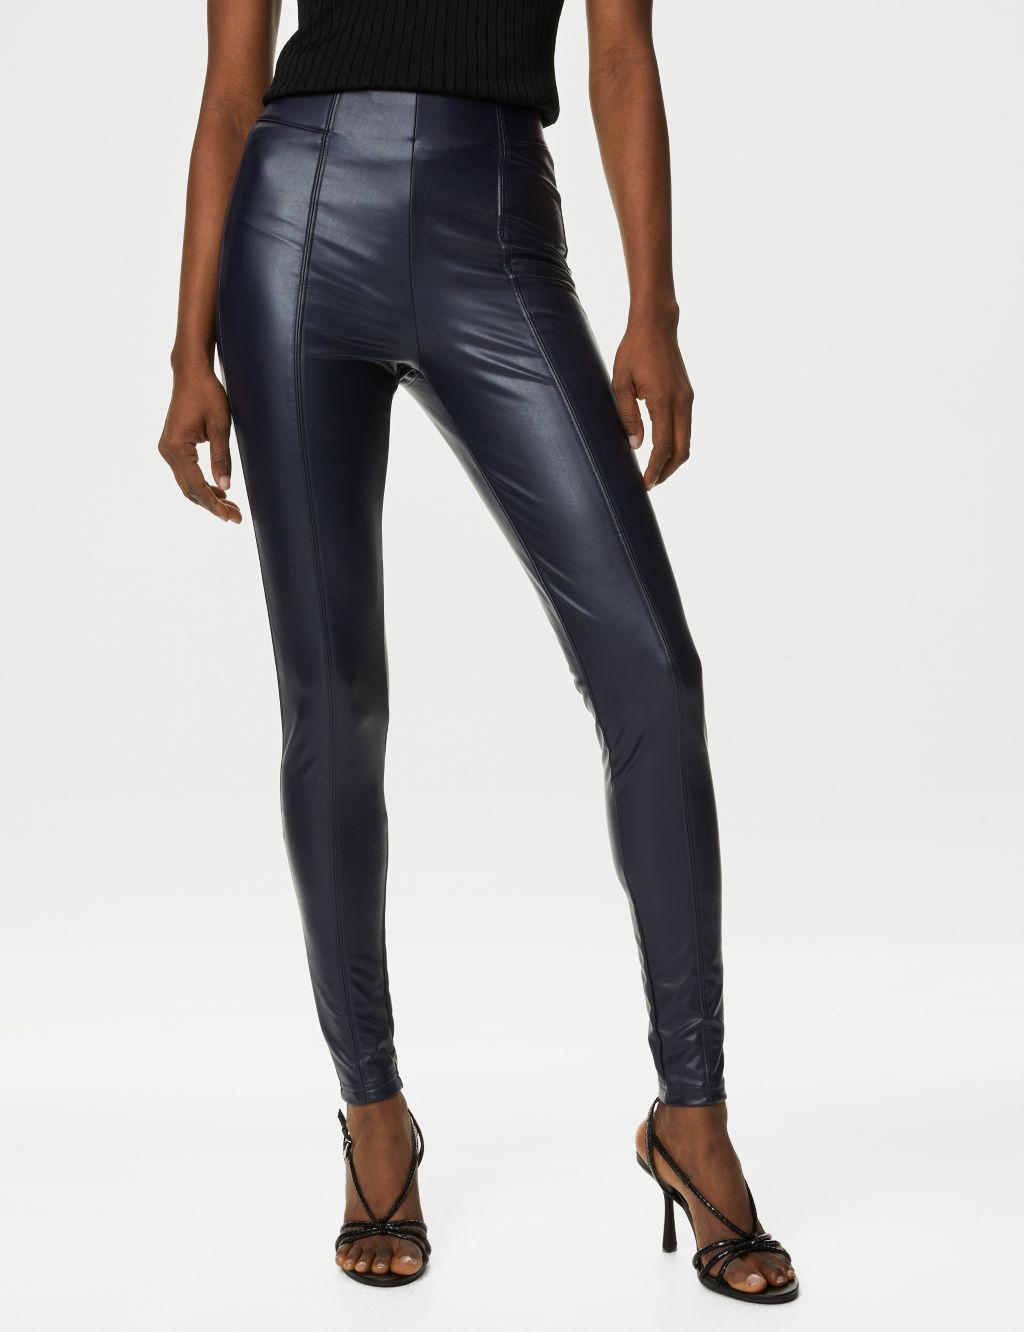 Leather Look High Waisted Leggings image 3